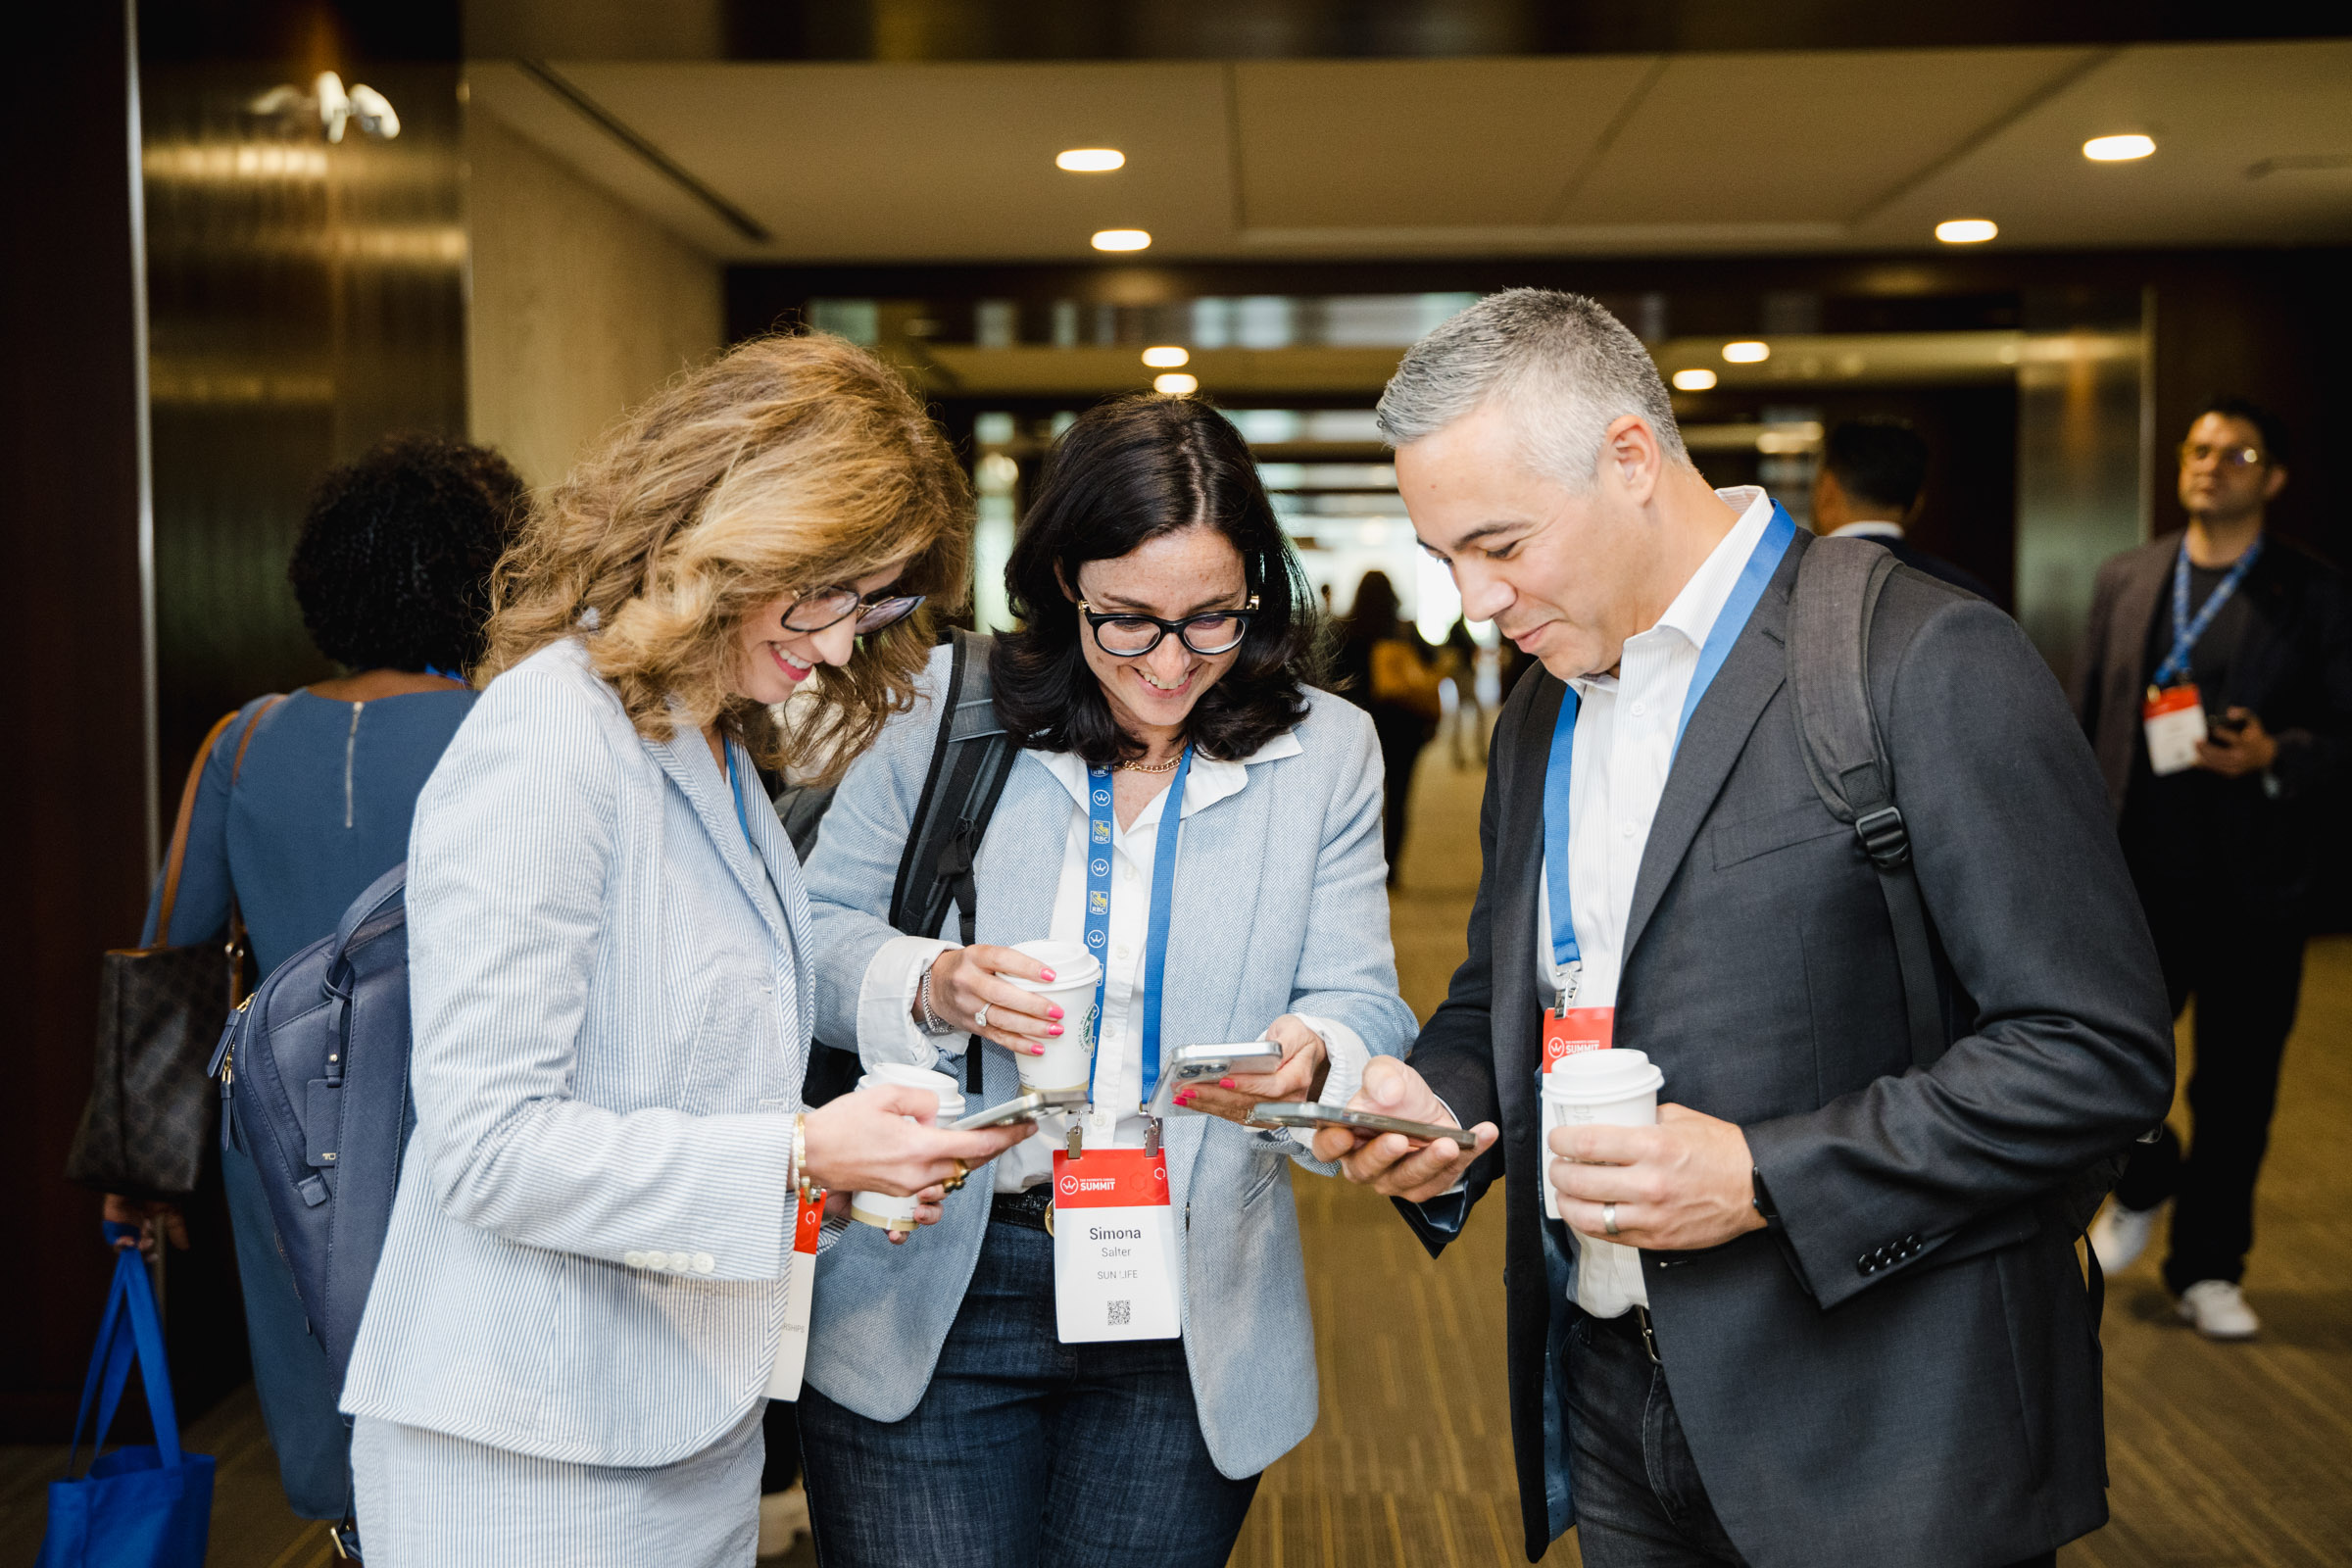 Three individuals in business attire look at their phones while standing together in a hallway. They are wearing name badges and holding coffee cups, capturing a candid moment perfect for event photography.